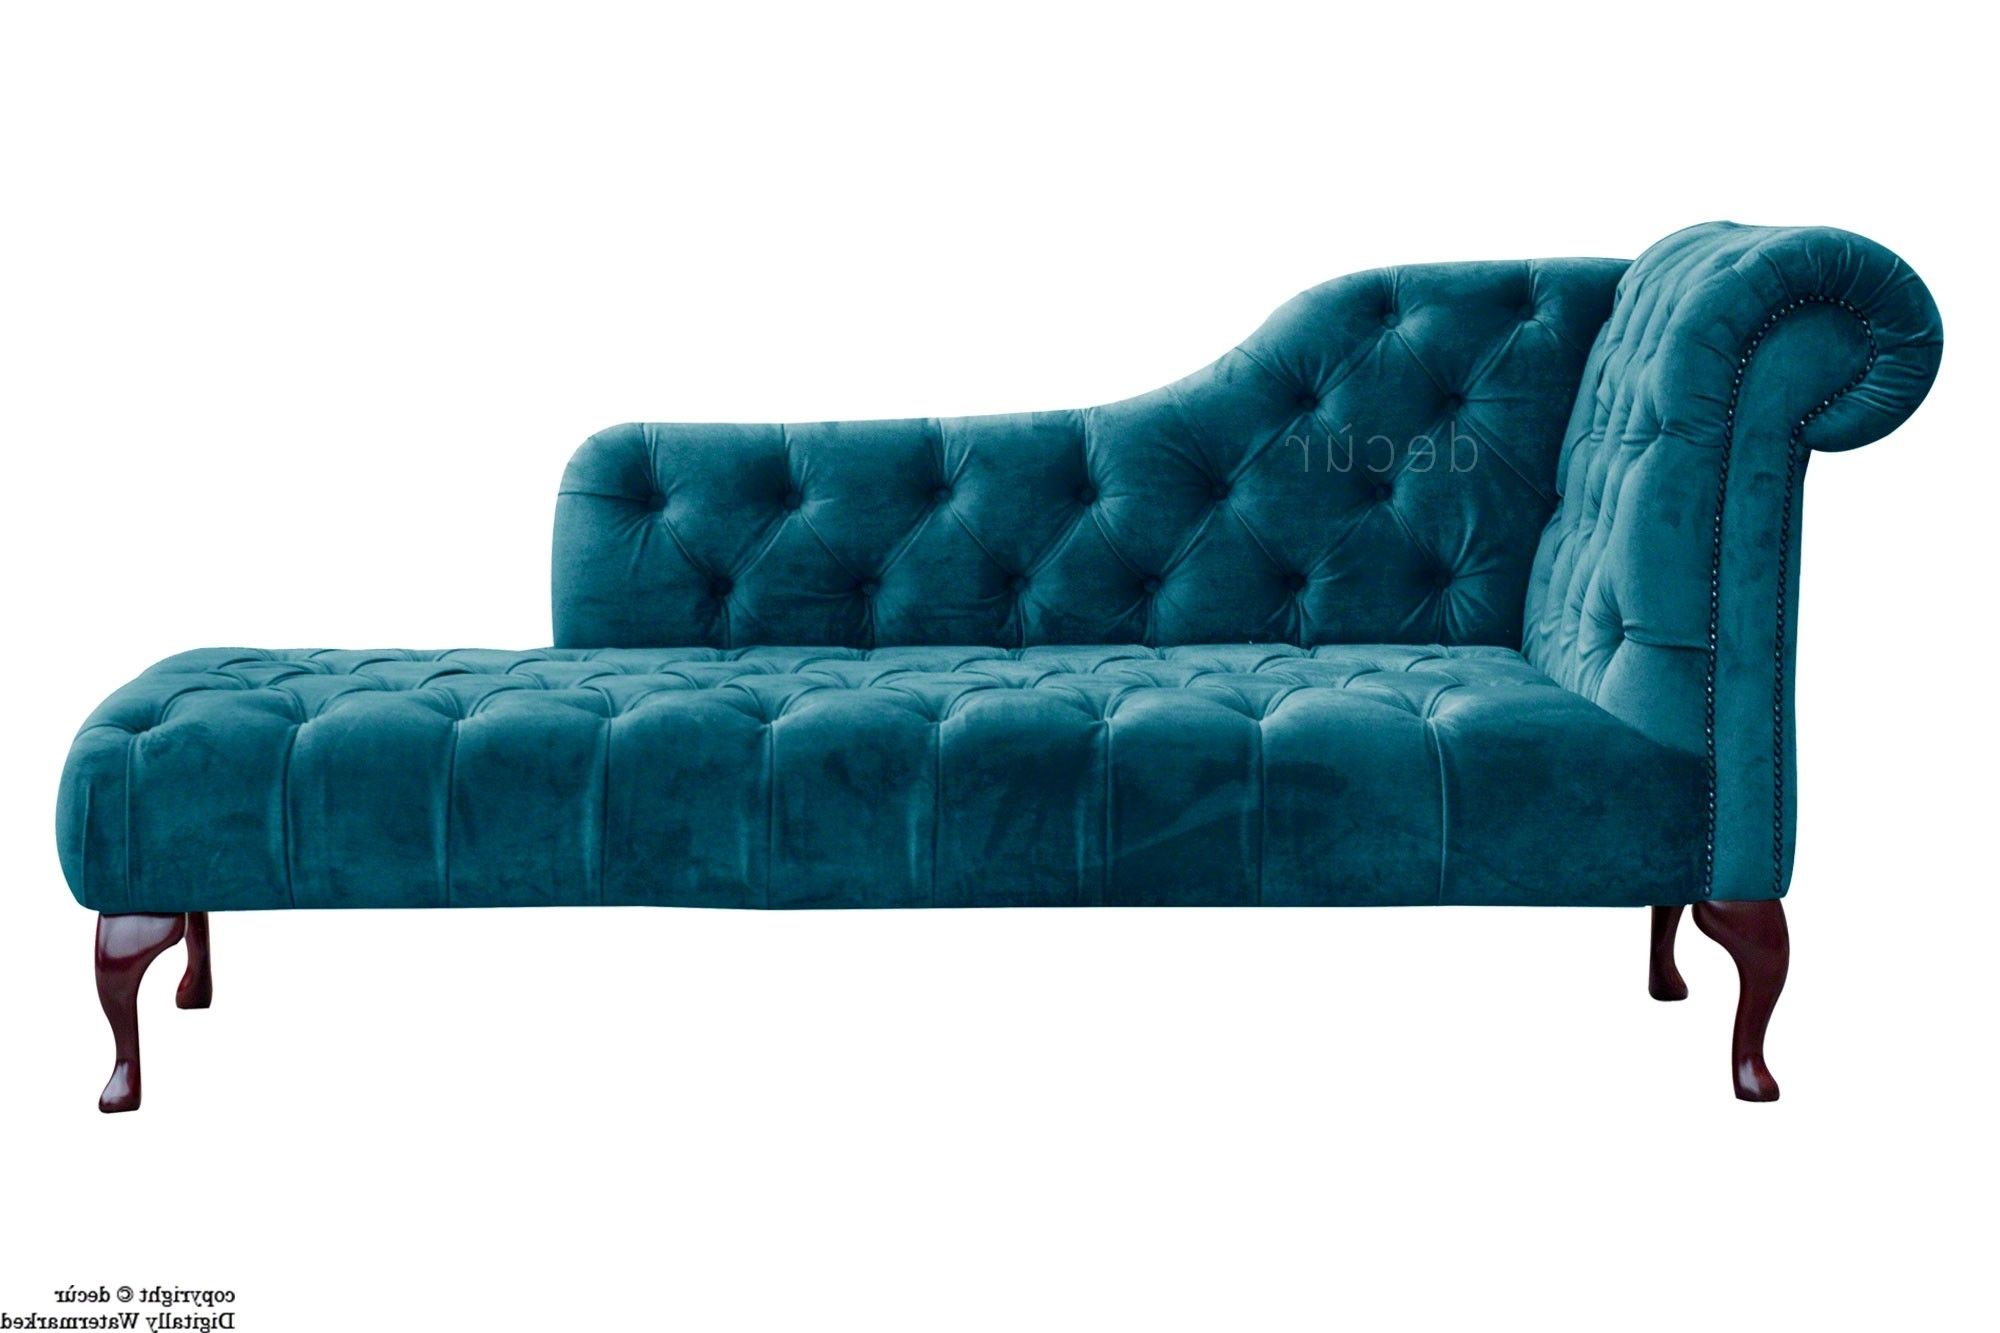 Bespoke Designer Sofas, Footstools, Bespoke Footstools, Bespoke Within Most Up To Date Teal Chaise Lounges (View 5 of 15)